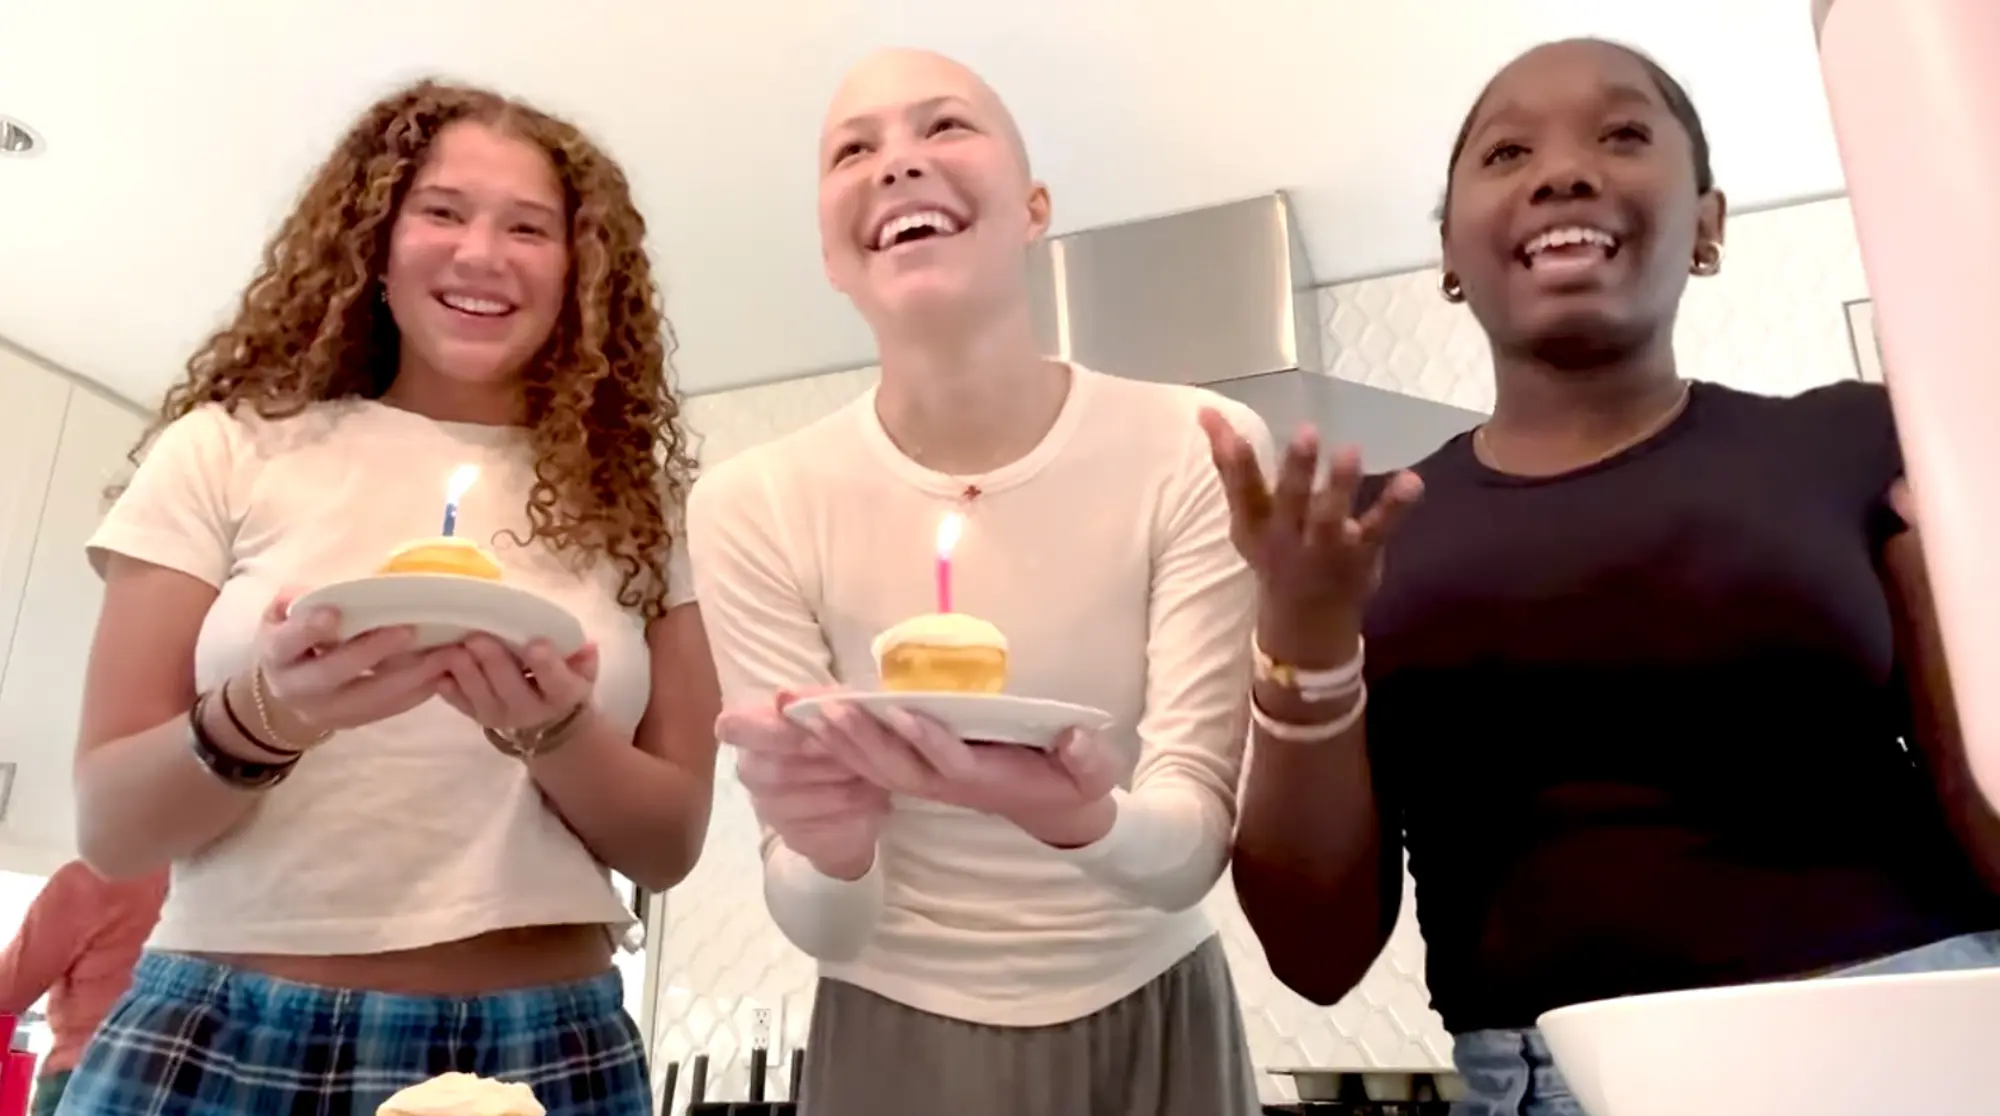 Isabella Strahan's Incredible Journey: From Brain Surgery to Birthday Cupcakes